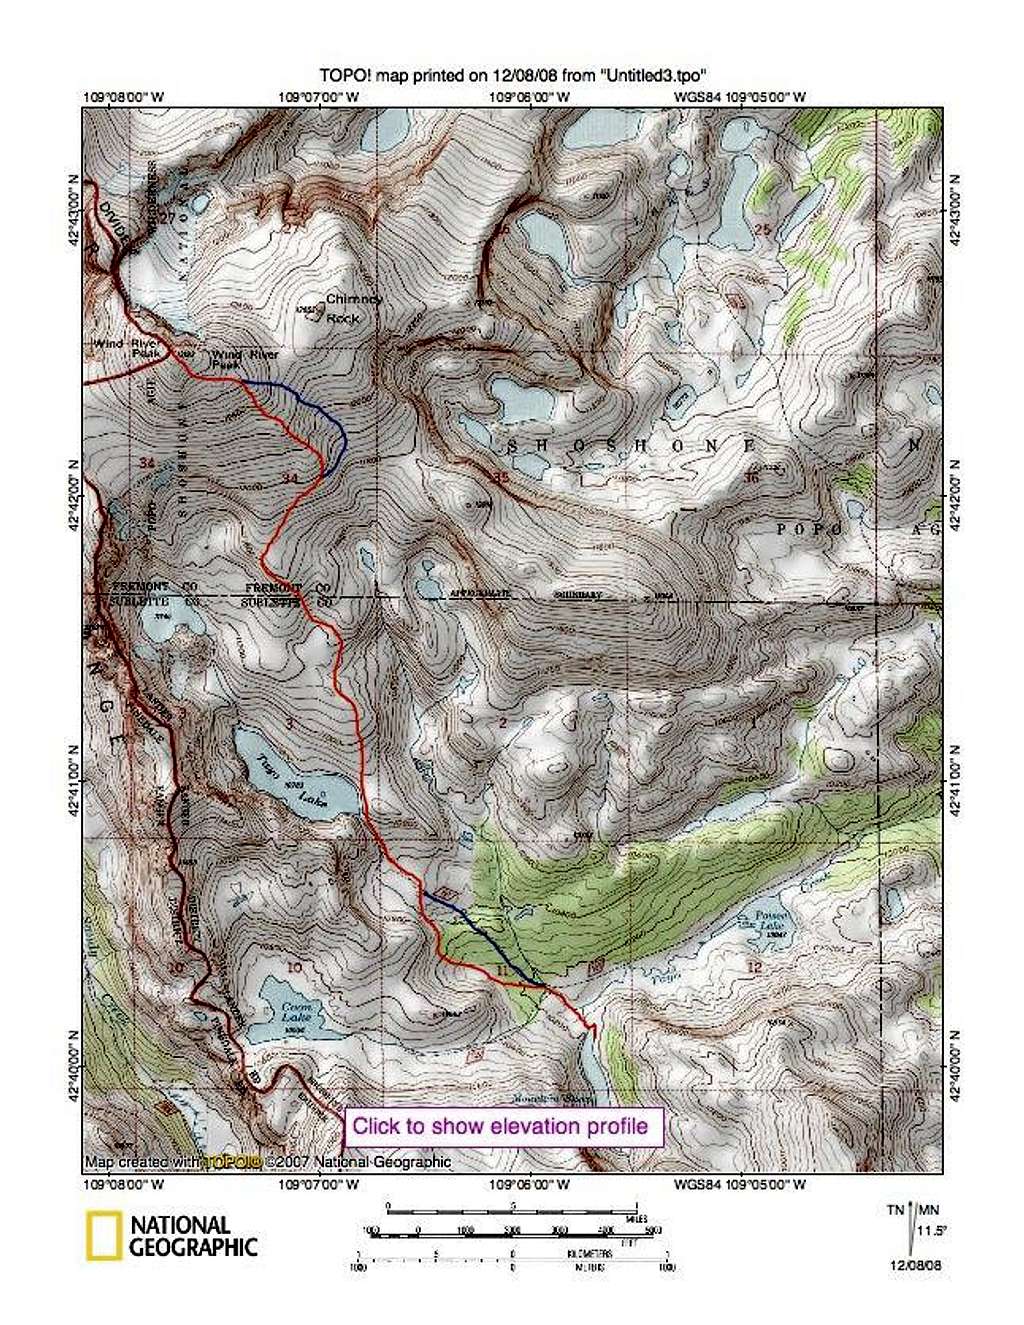 Our route on Wind River Peak